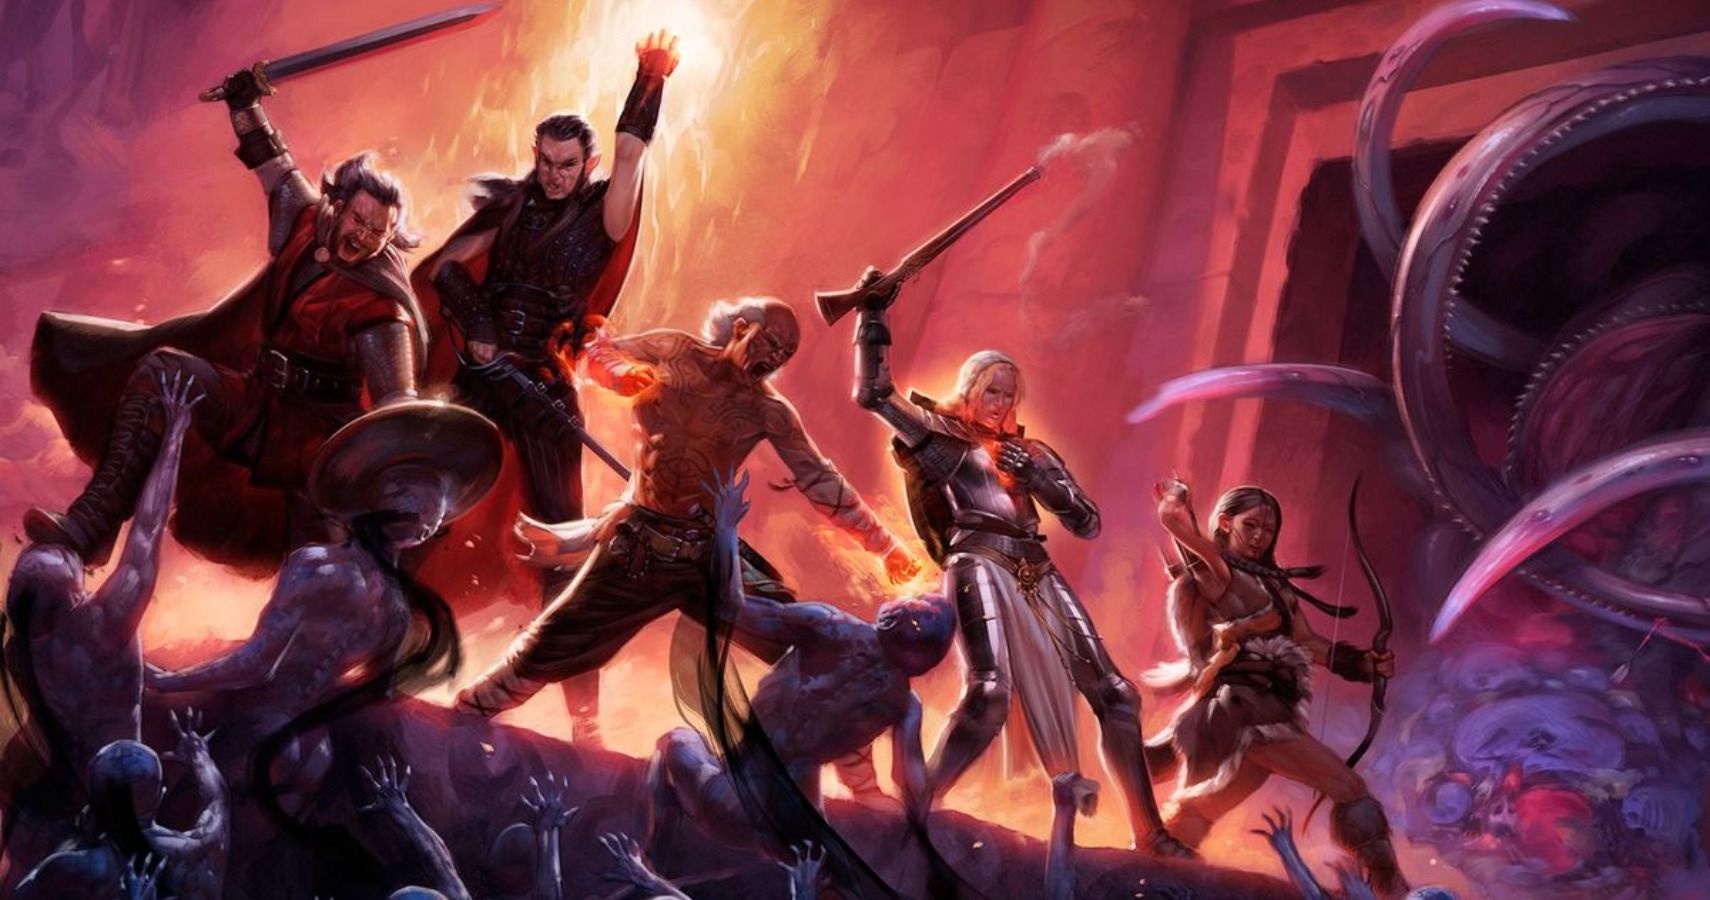 Pillars Of Eternity Switch Patch Will Finally Bring It In Line With The PC Version